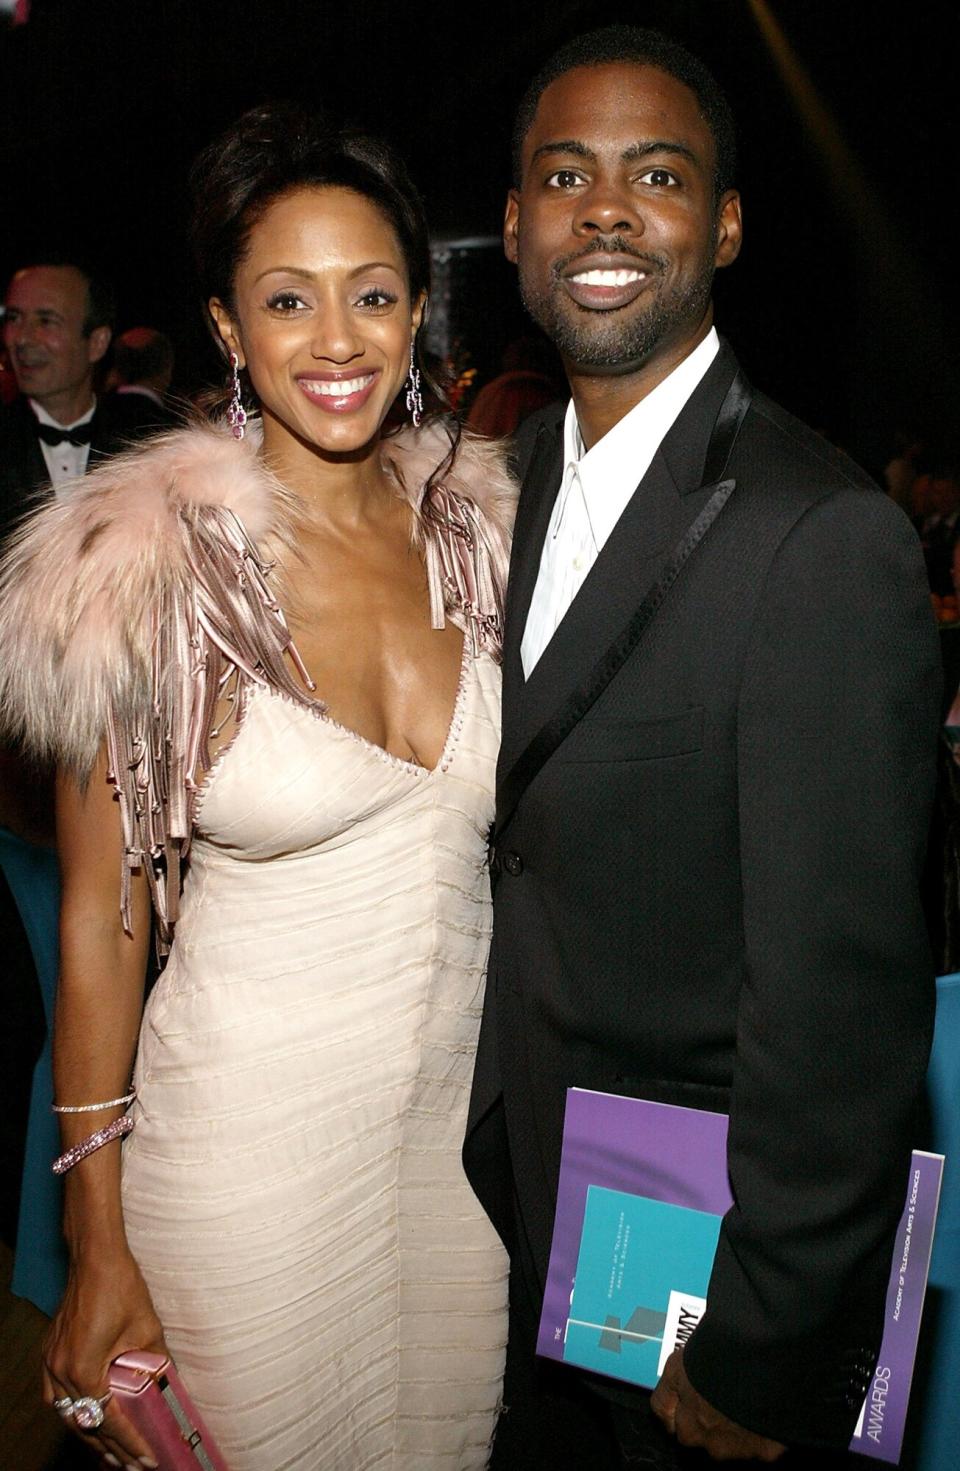 Chris Rock (R) and his wife Malaak Compton-Rock mingle at the Governor's Ball after the 56th Annual Primetime Emmy Awards at the Shrine Auditorium September 19, 2004 in Los Angeles, California